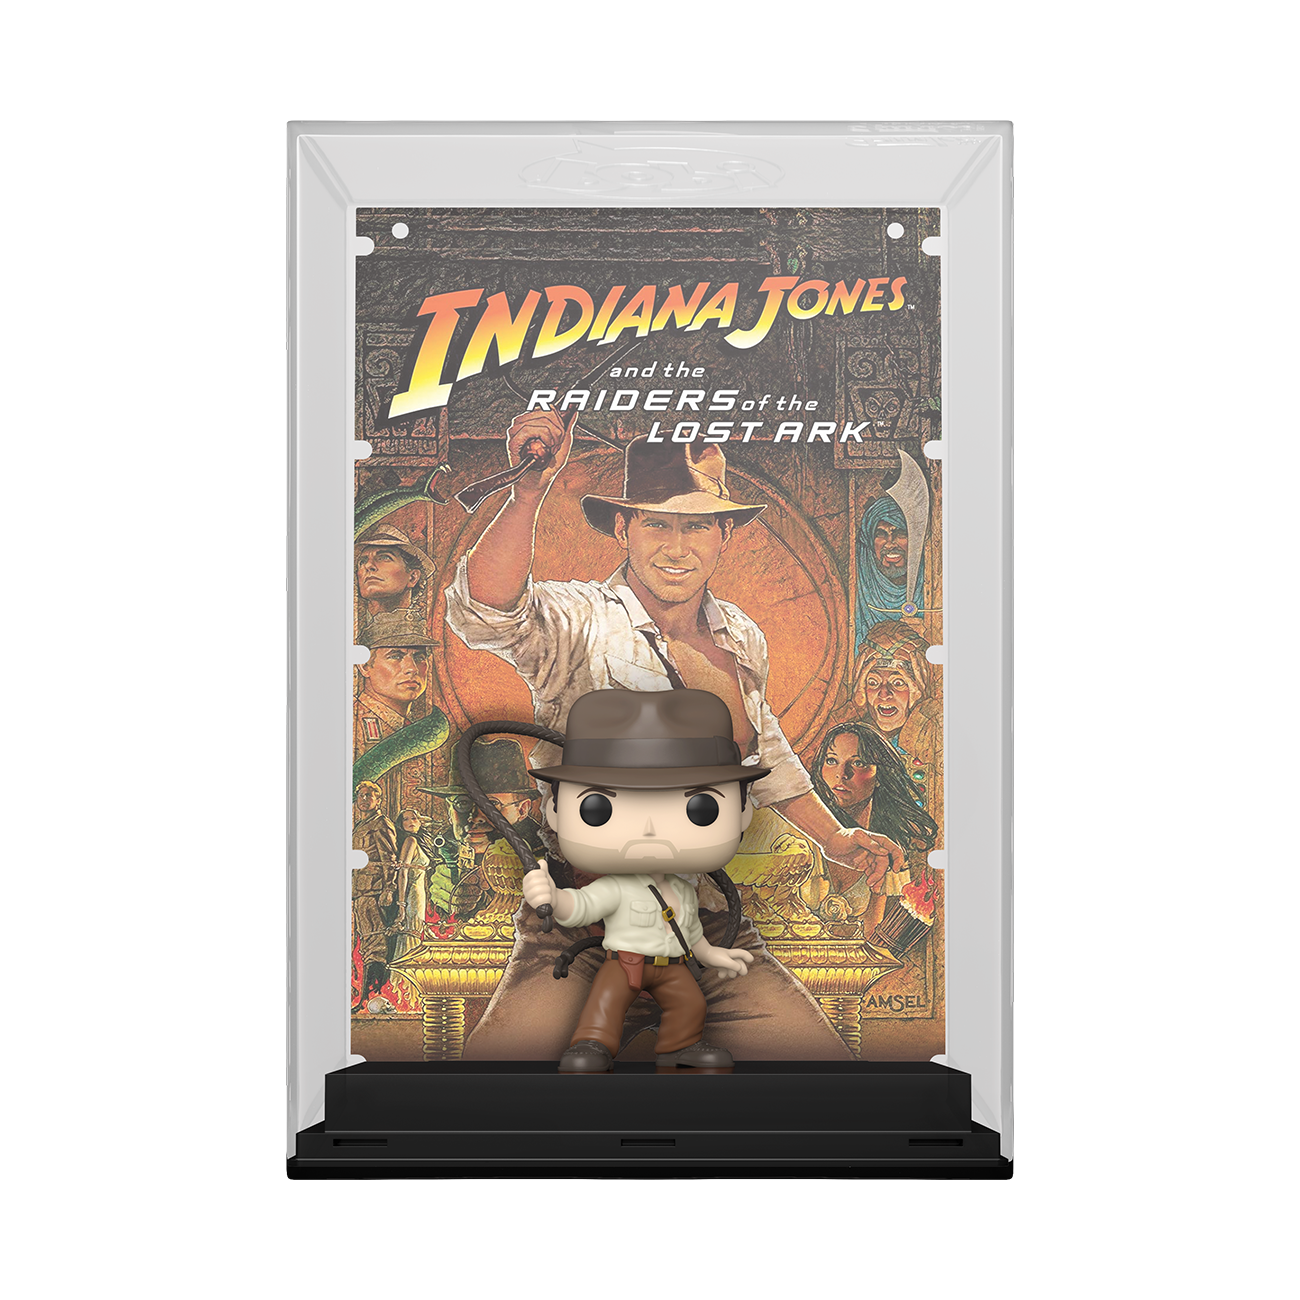 Photos - Action Figures / Transformers Funko POP! MOVIE POSTER Indiana Jones And The Raiders Of The Lost Ark 